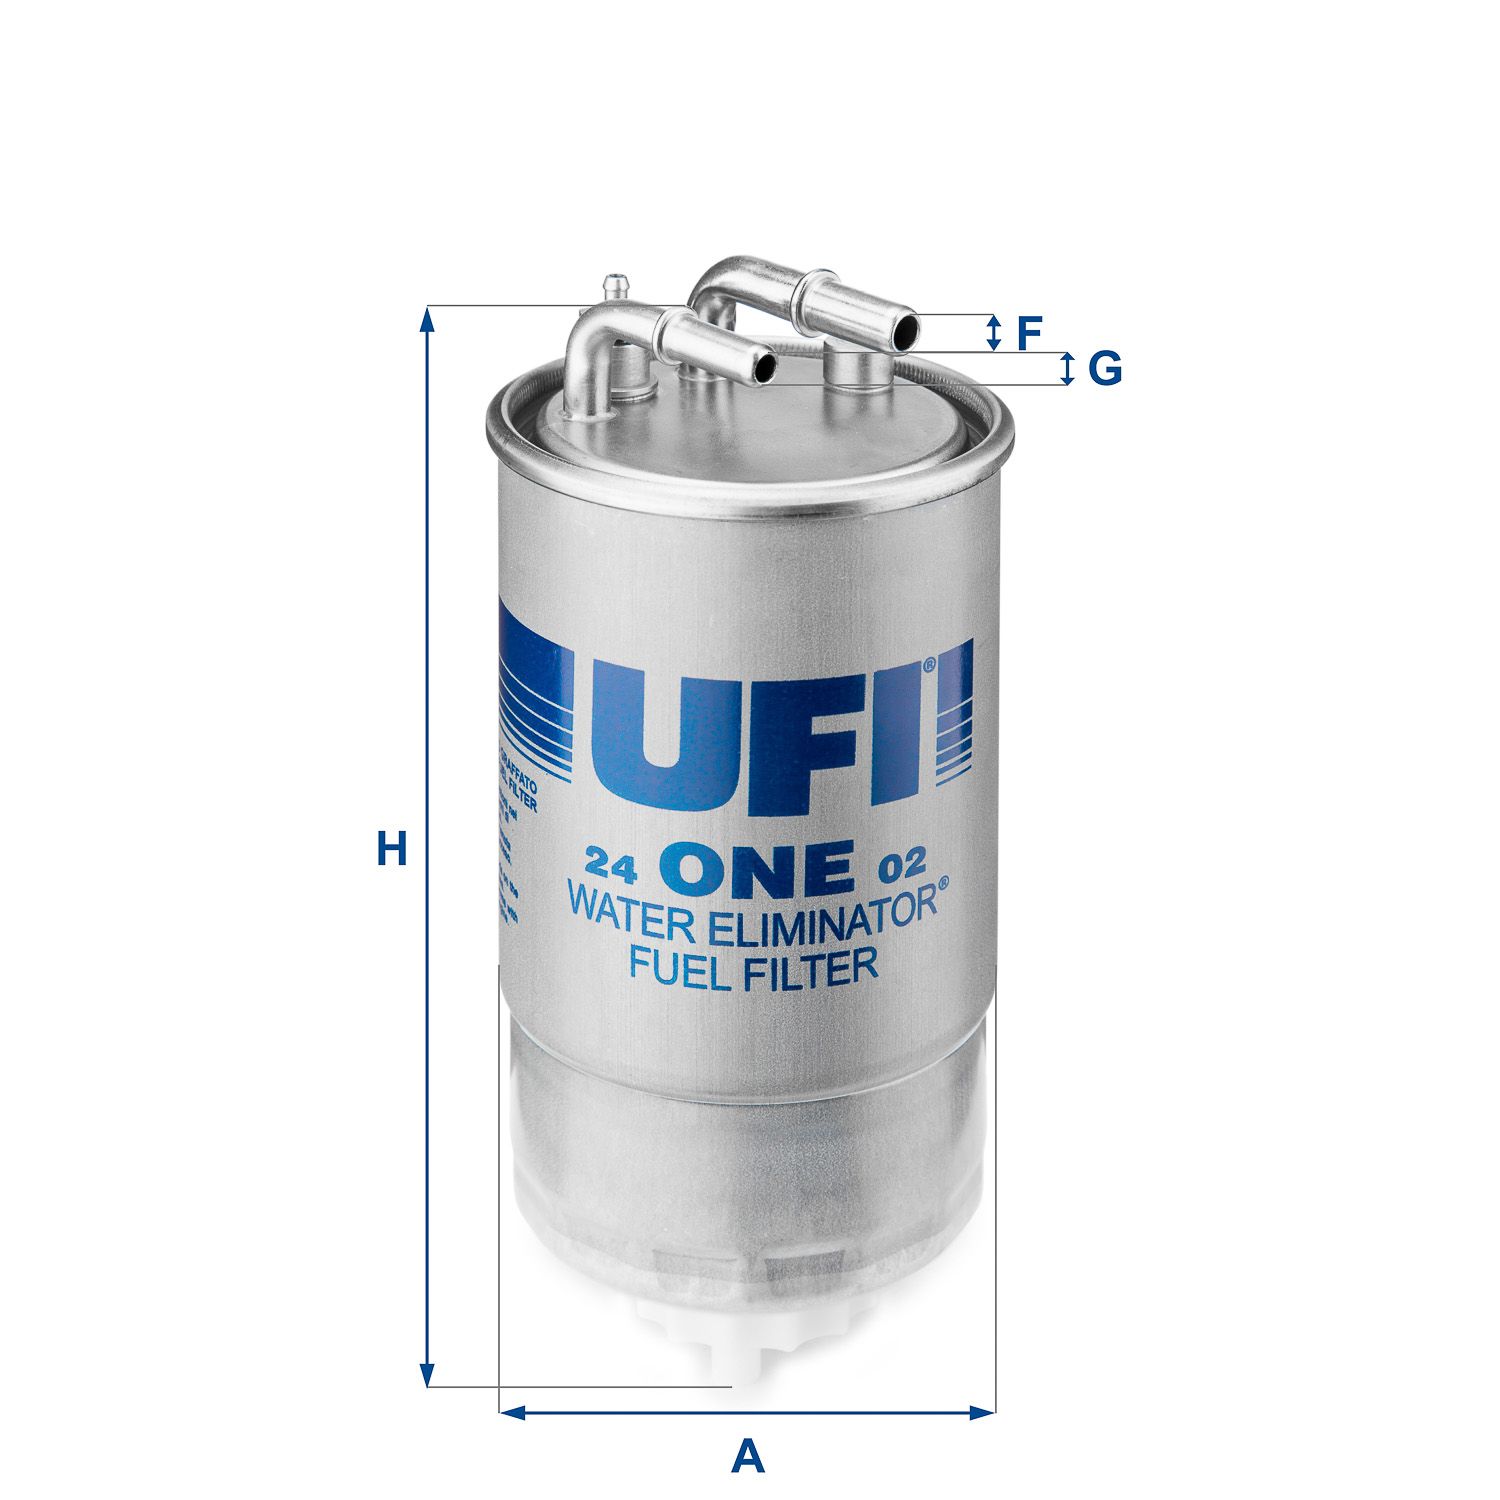 Fuel Filter 24.ONE.02